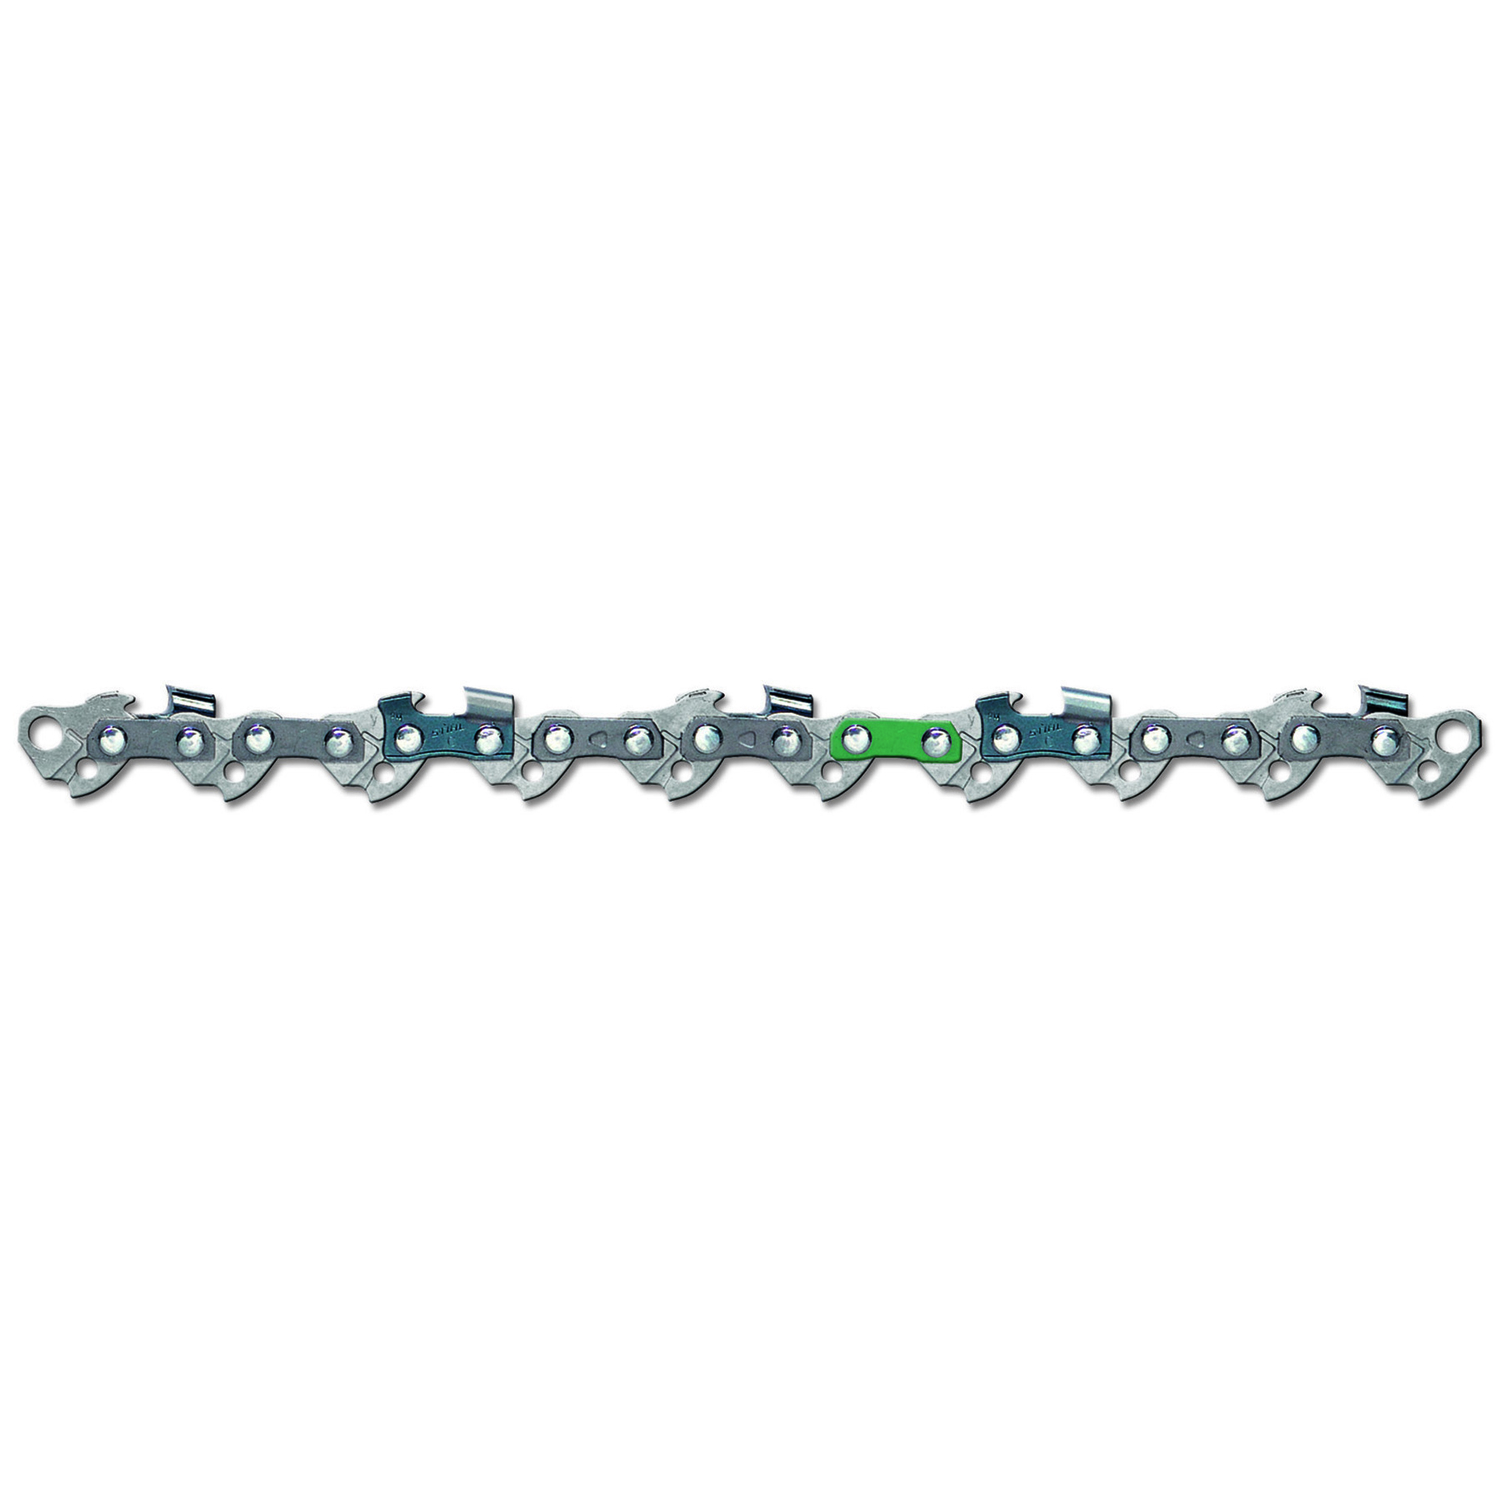 81 Links 24 in.L Replacement Saw Chain